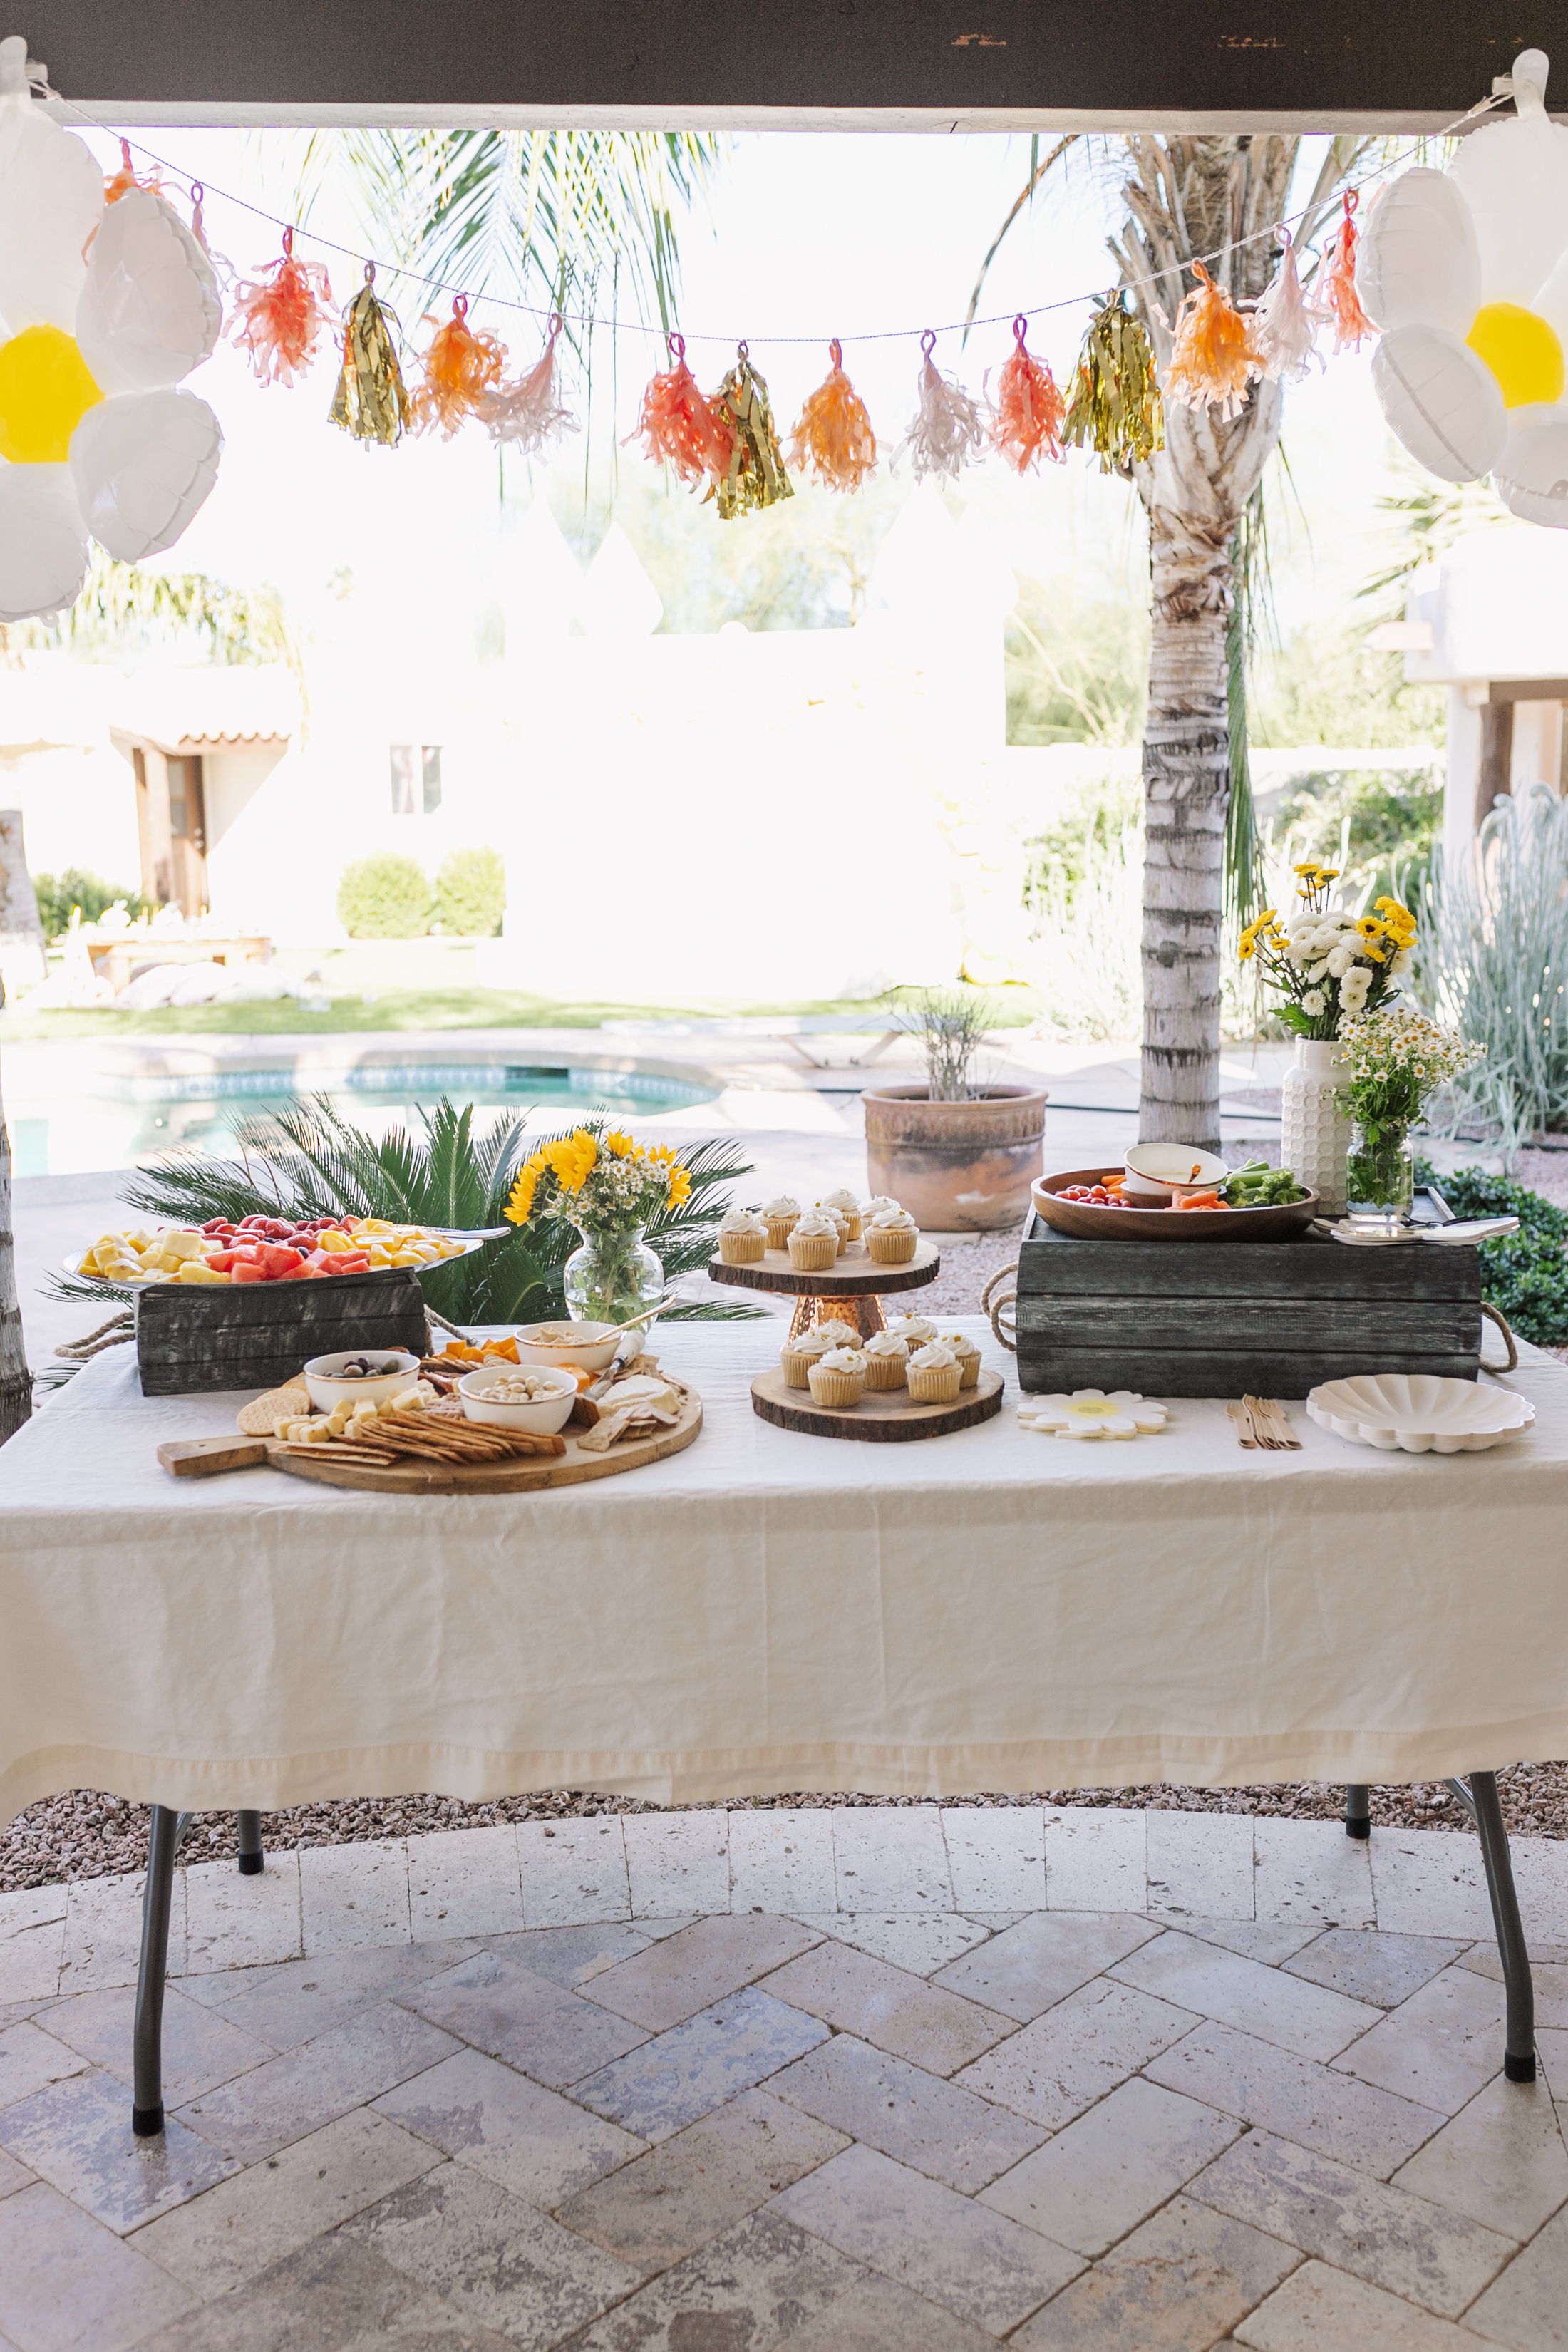 the food table for this sweet honeybee birthday party #thelovedesignedlife #theldlparties #partiesandcelebrations #birthdaypartyideas